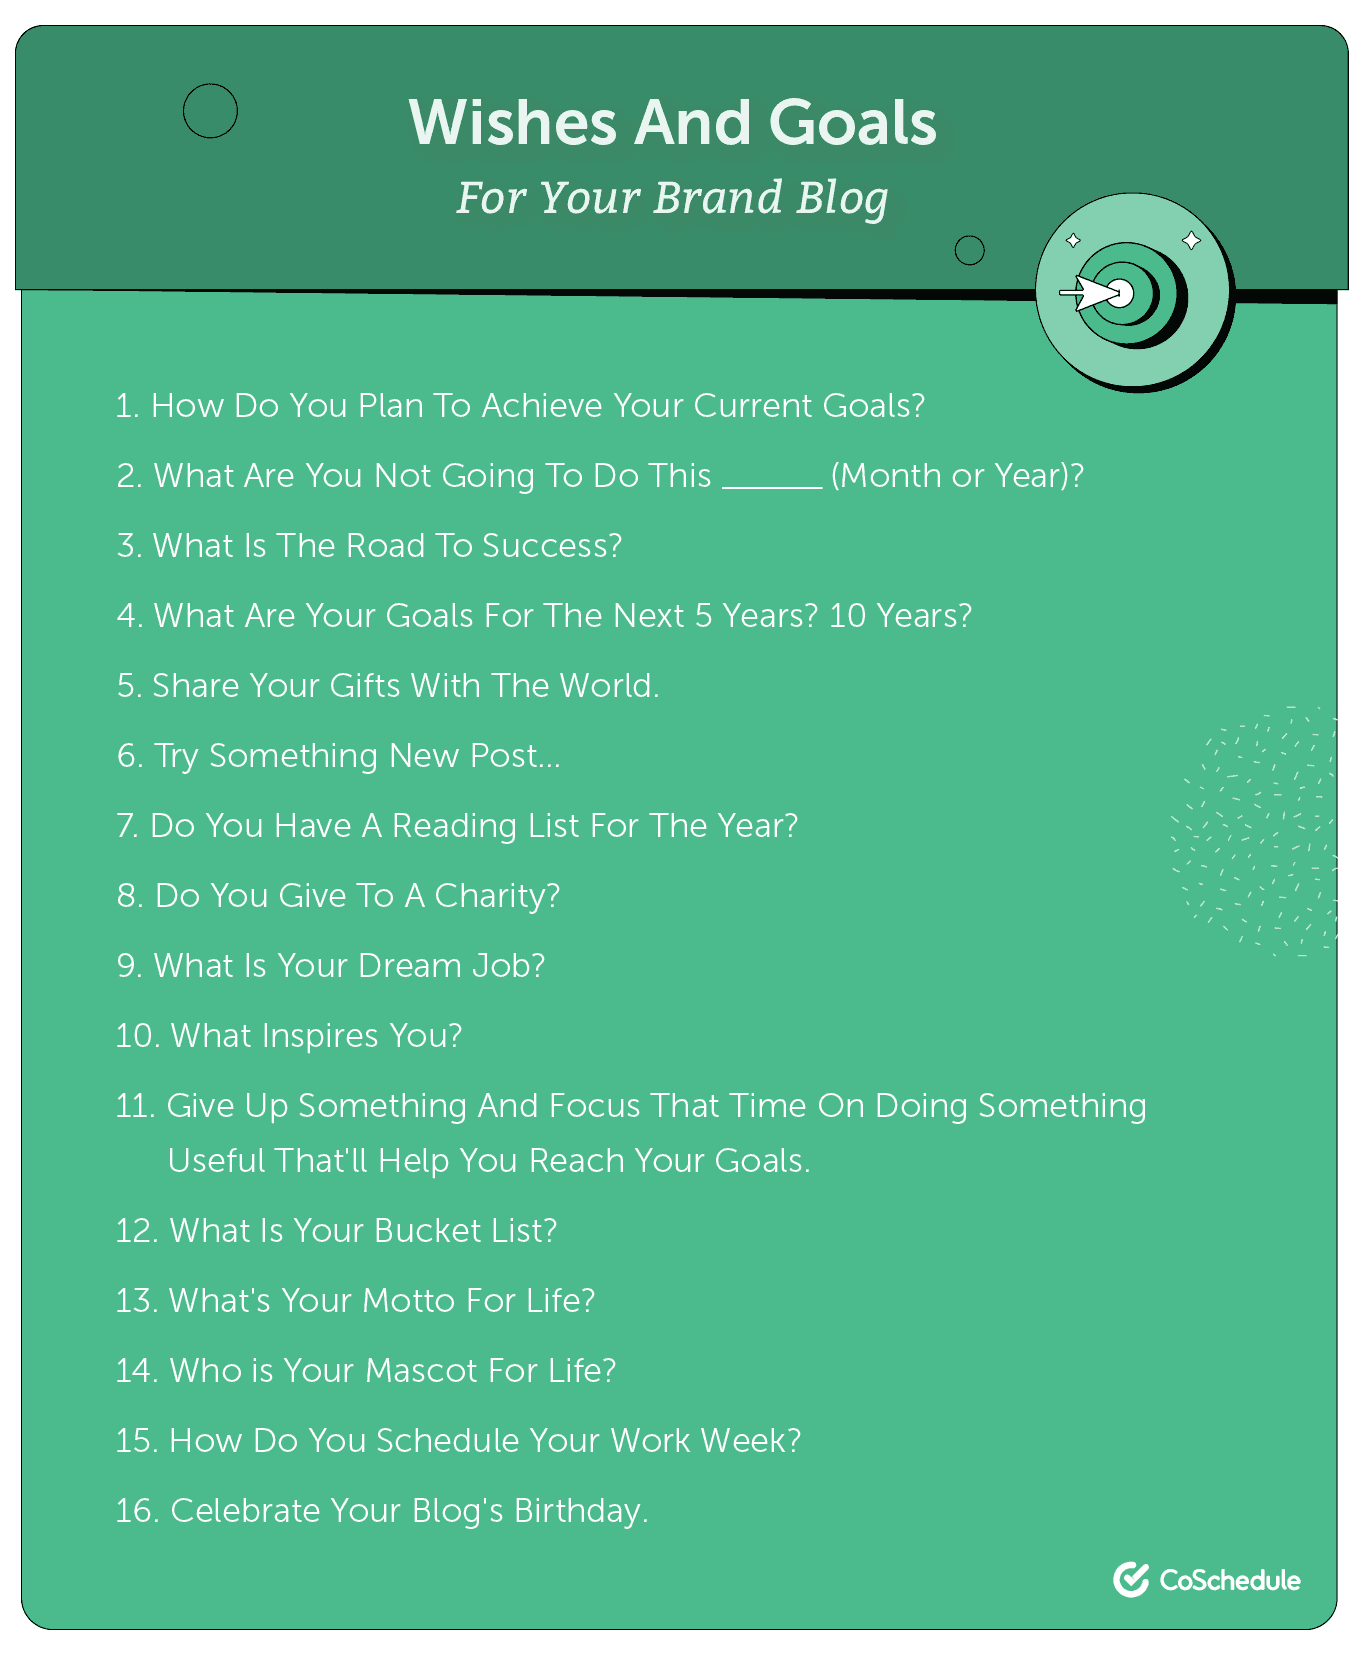 Wishes and goals for your brand blog.